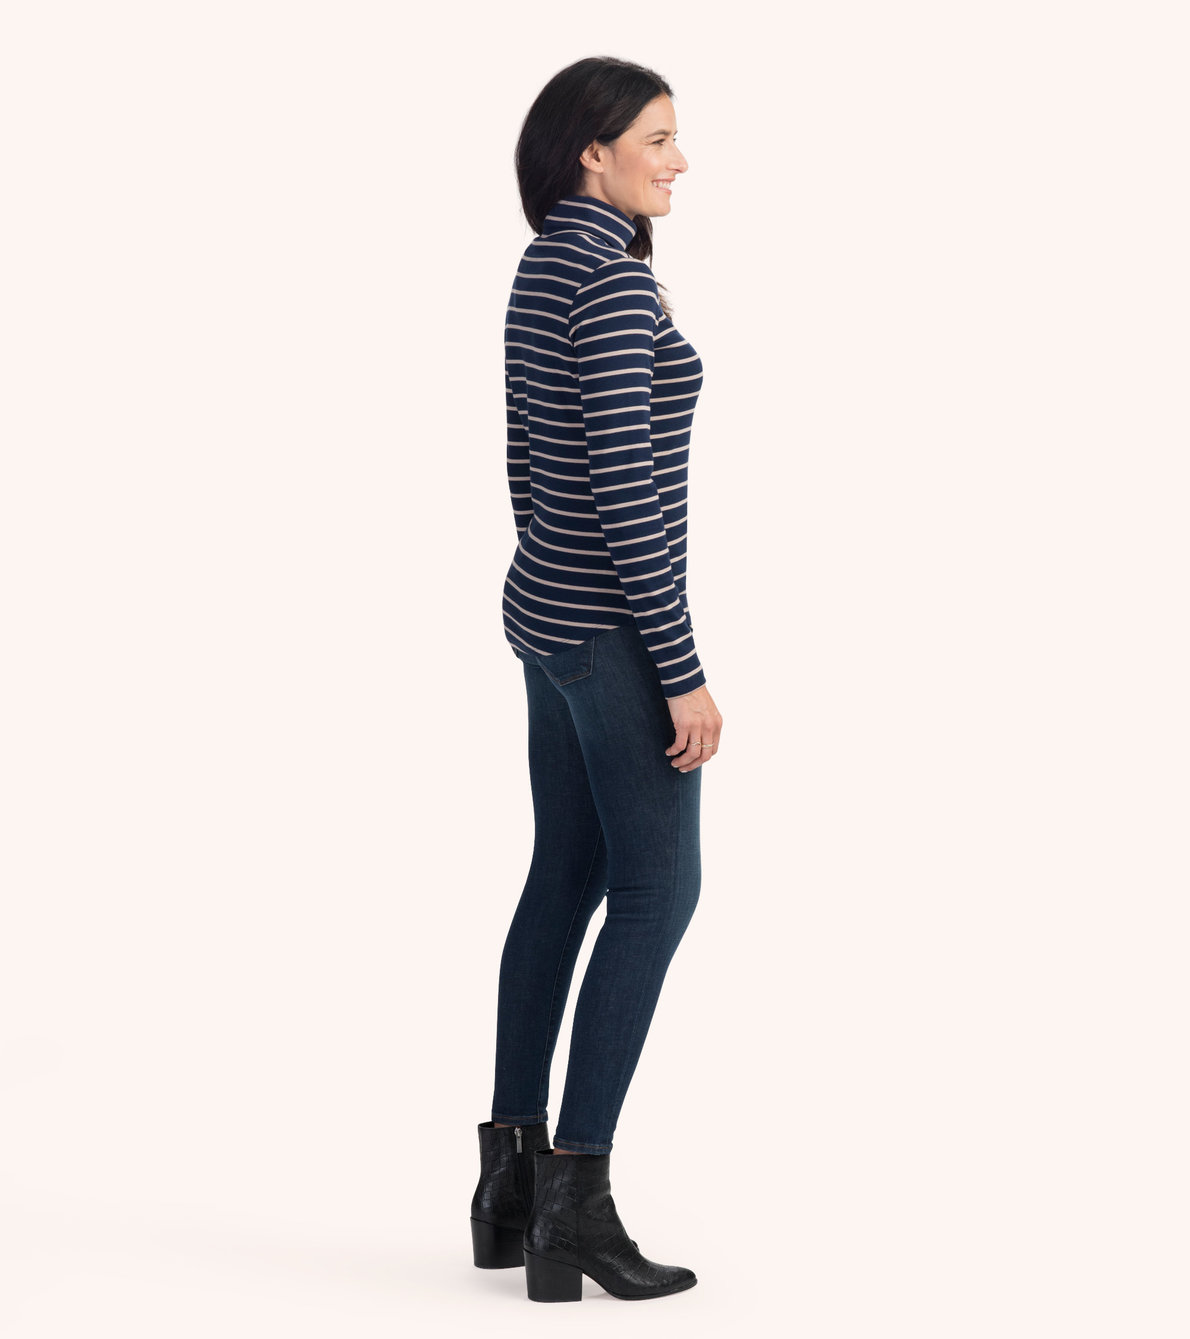 View larger image of Navy and Camel Stripes Turtleneck